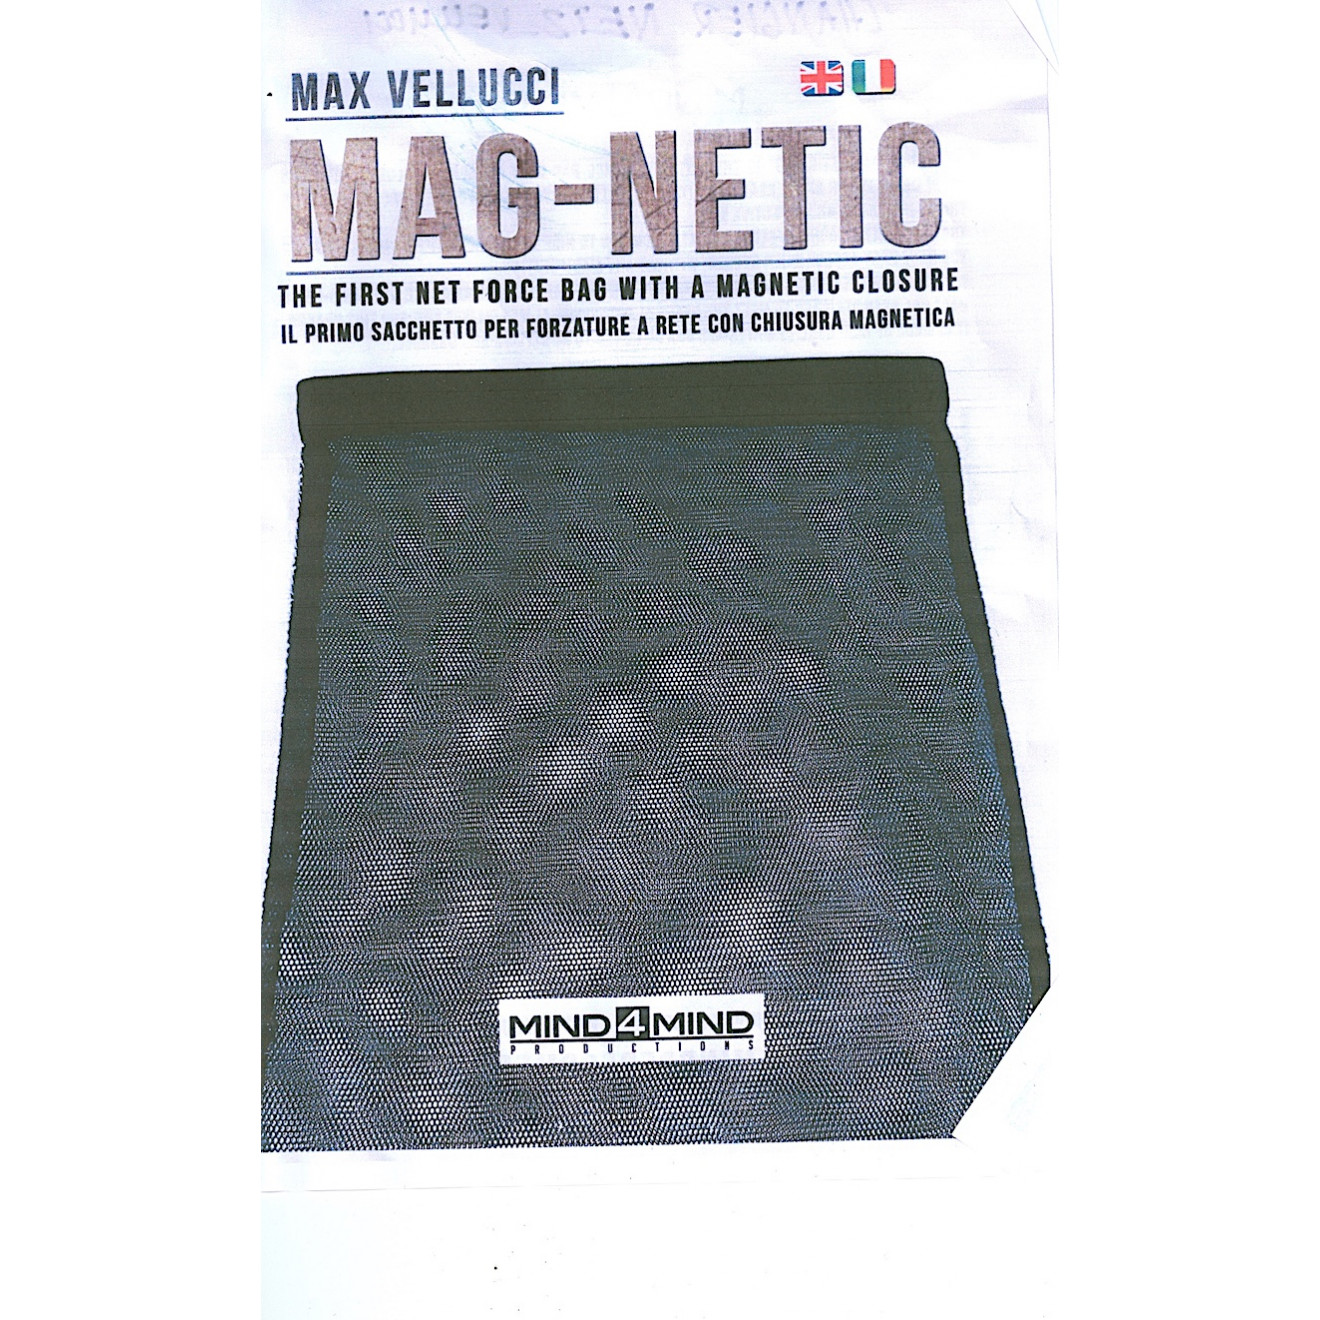 Mag Net Bag by Max Vellucci